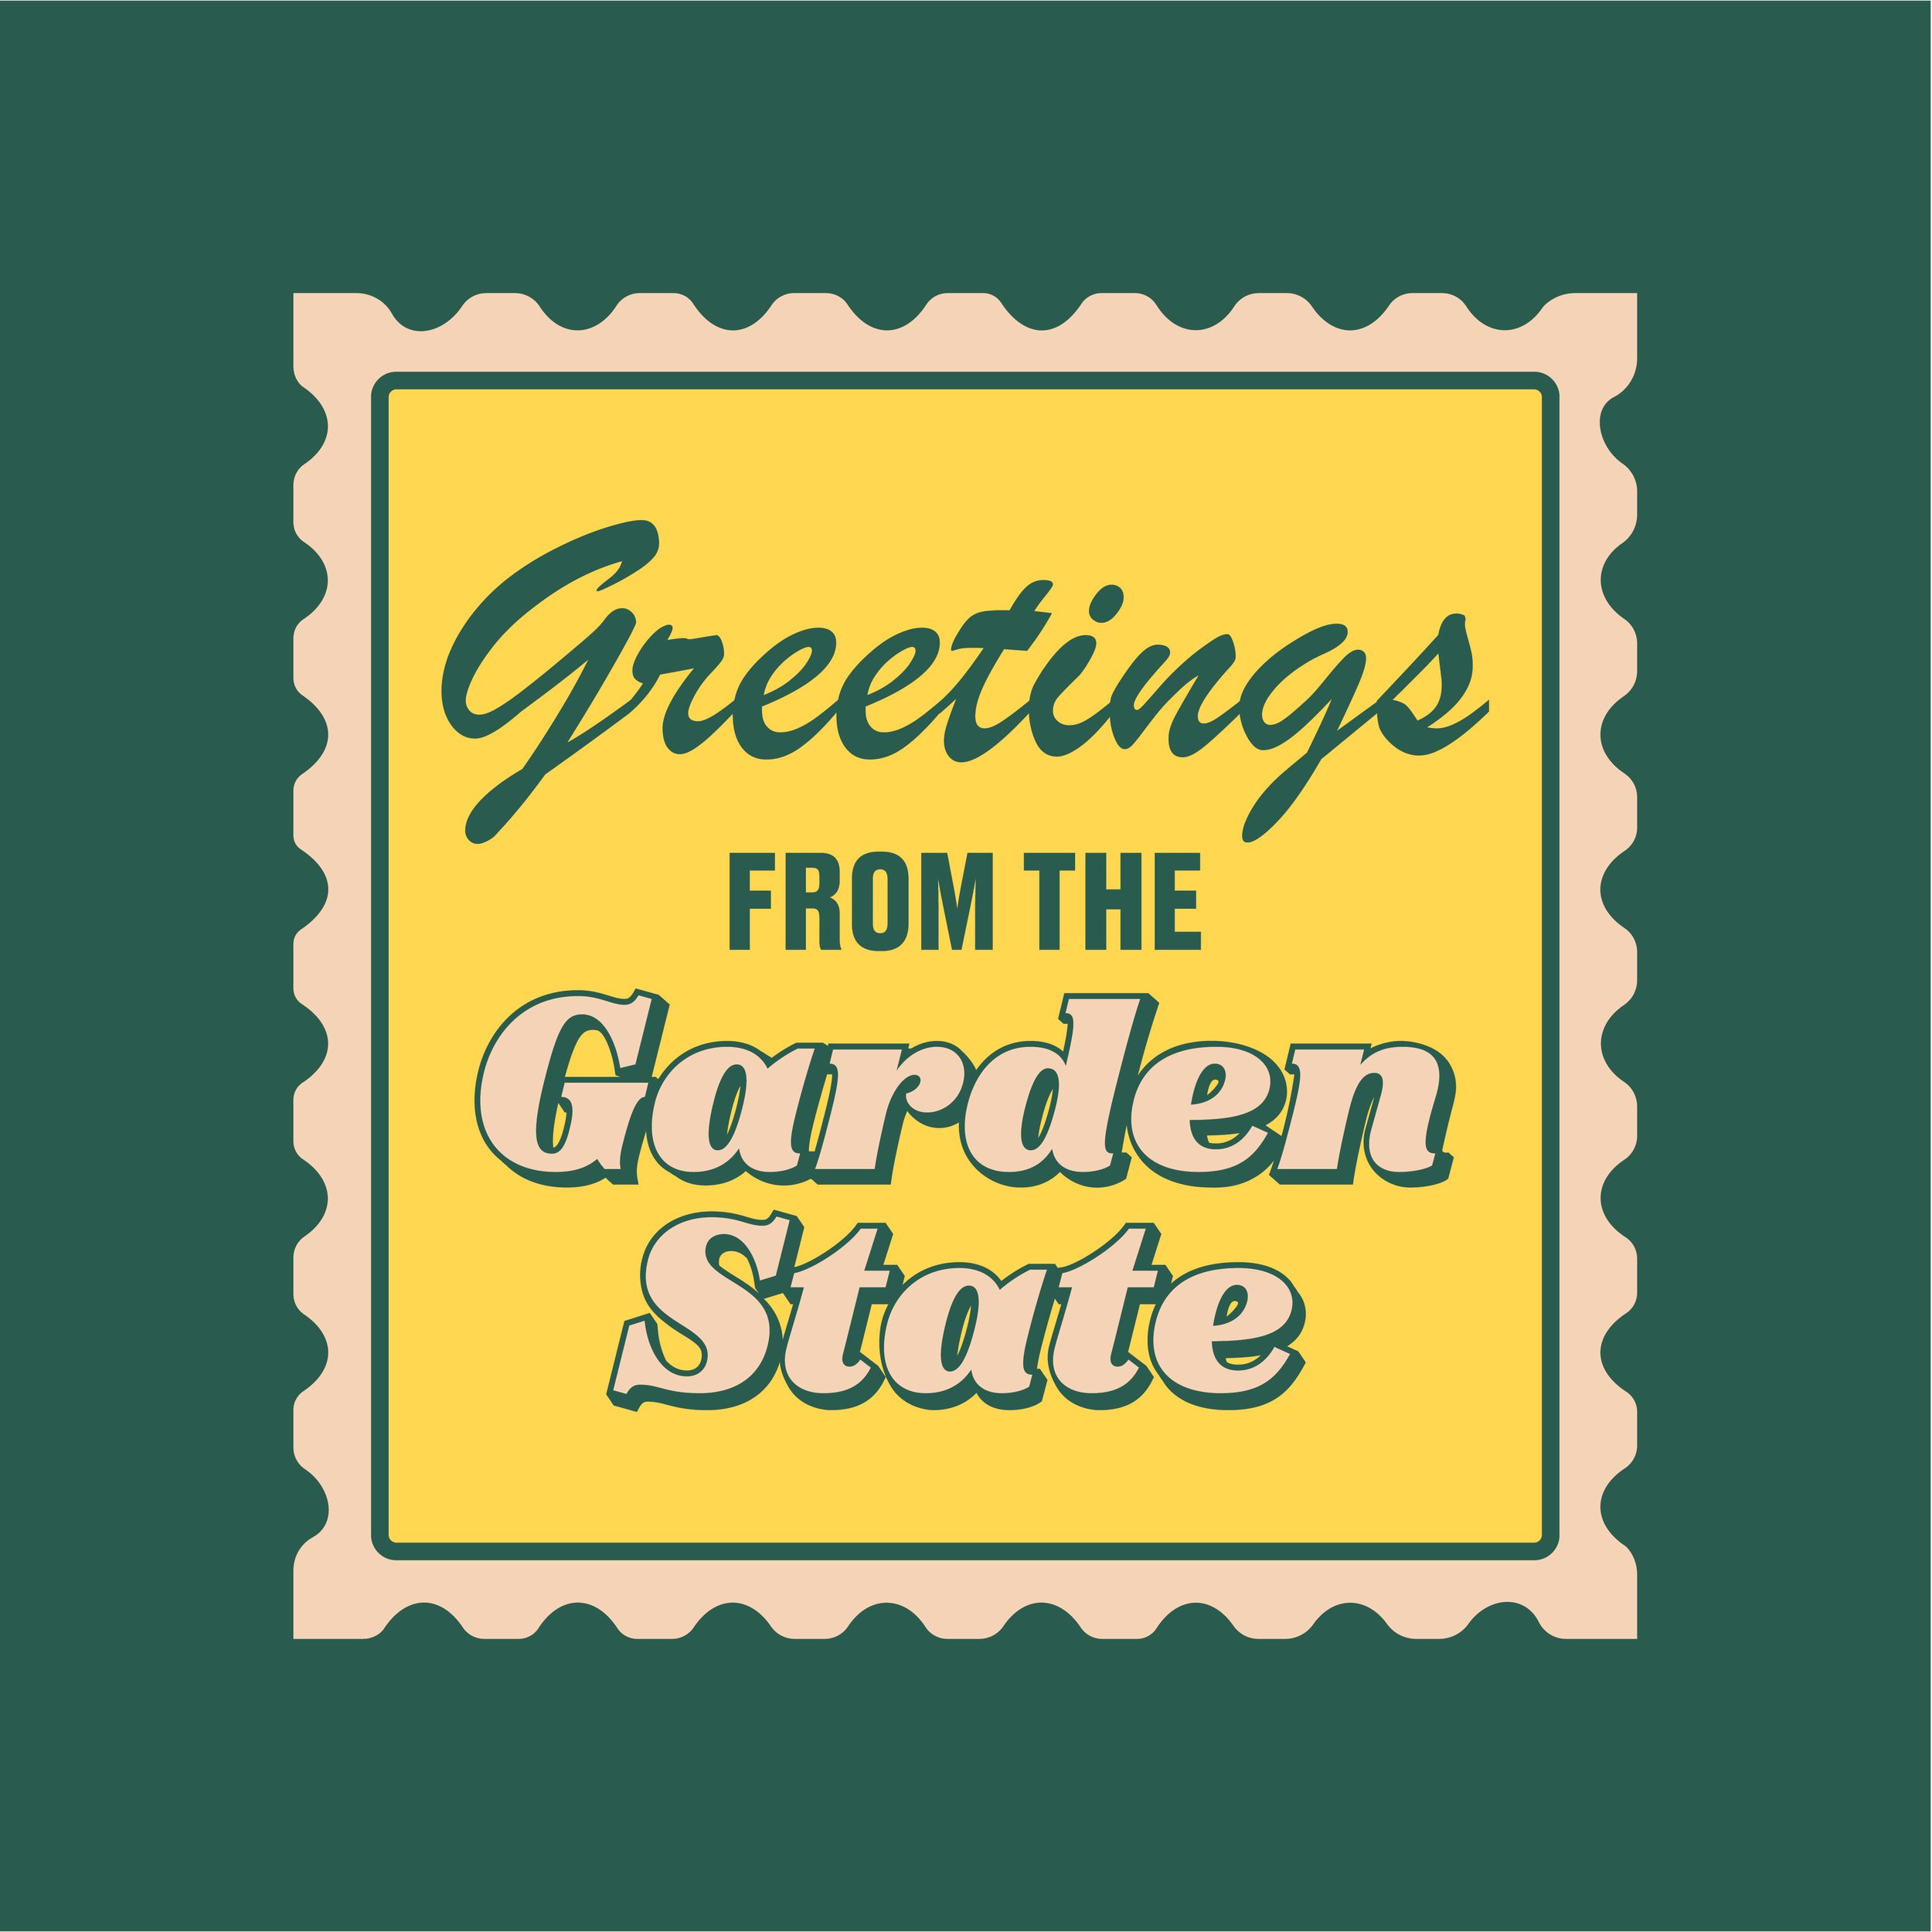 Greeting From The Garden State Stamp @4x-100.jpg